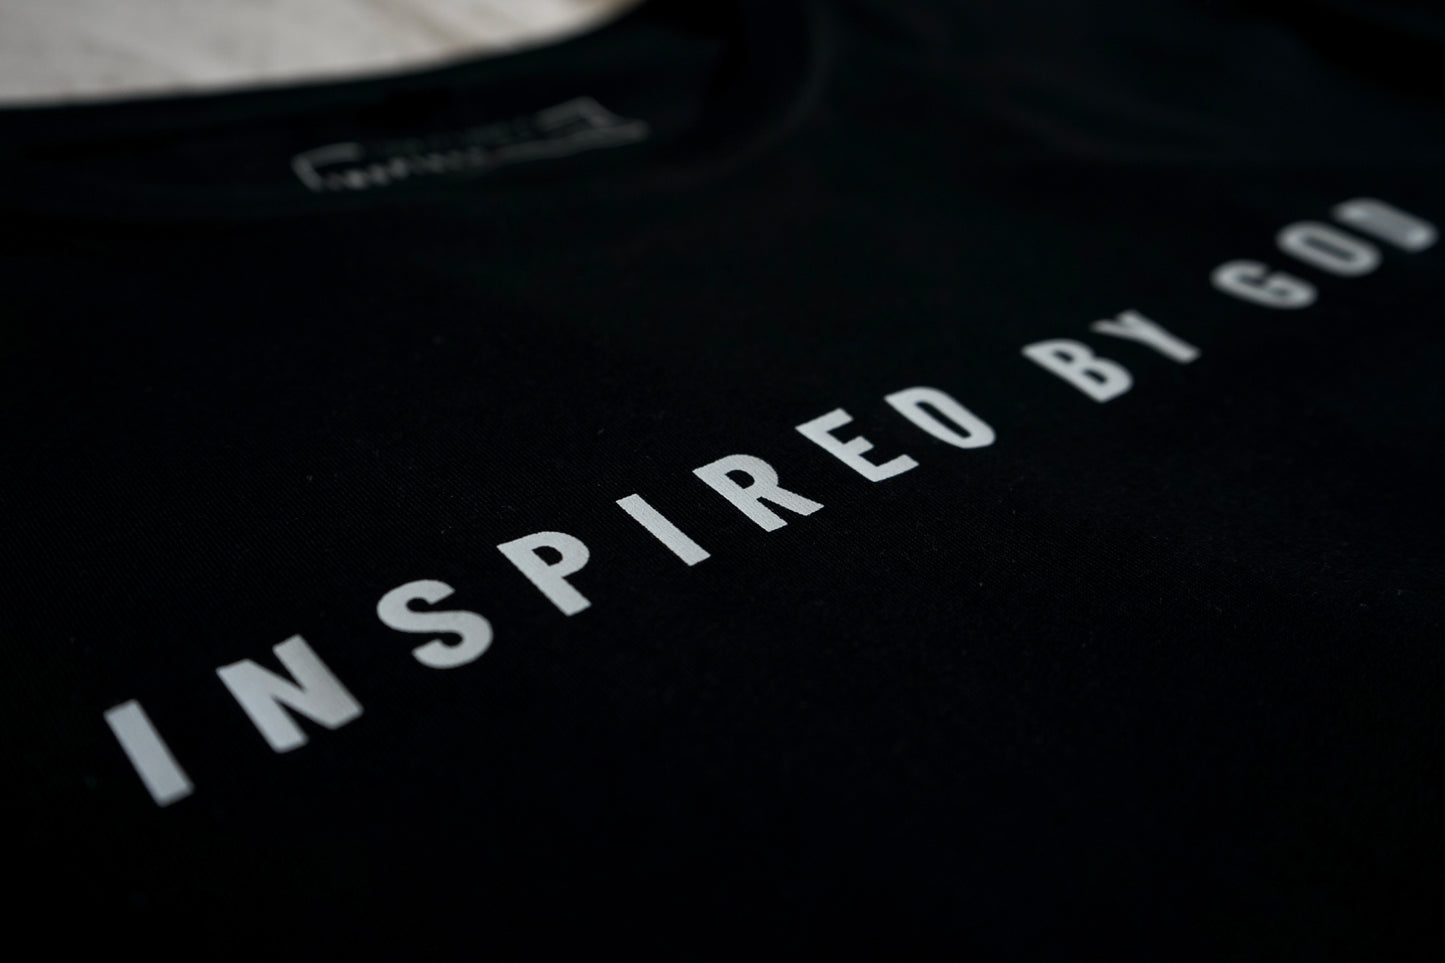 "Inspired by God" - black tee